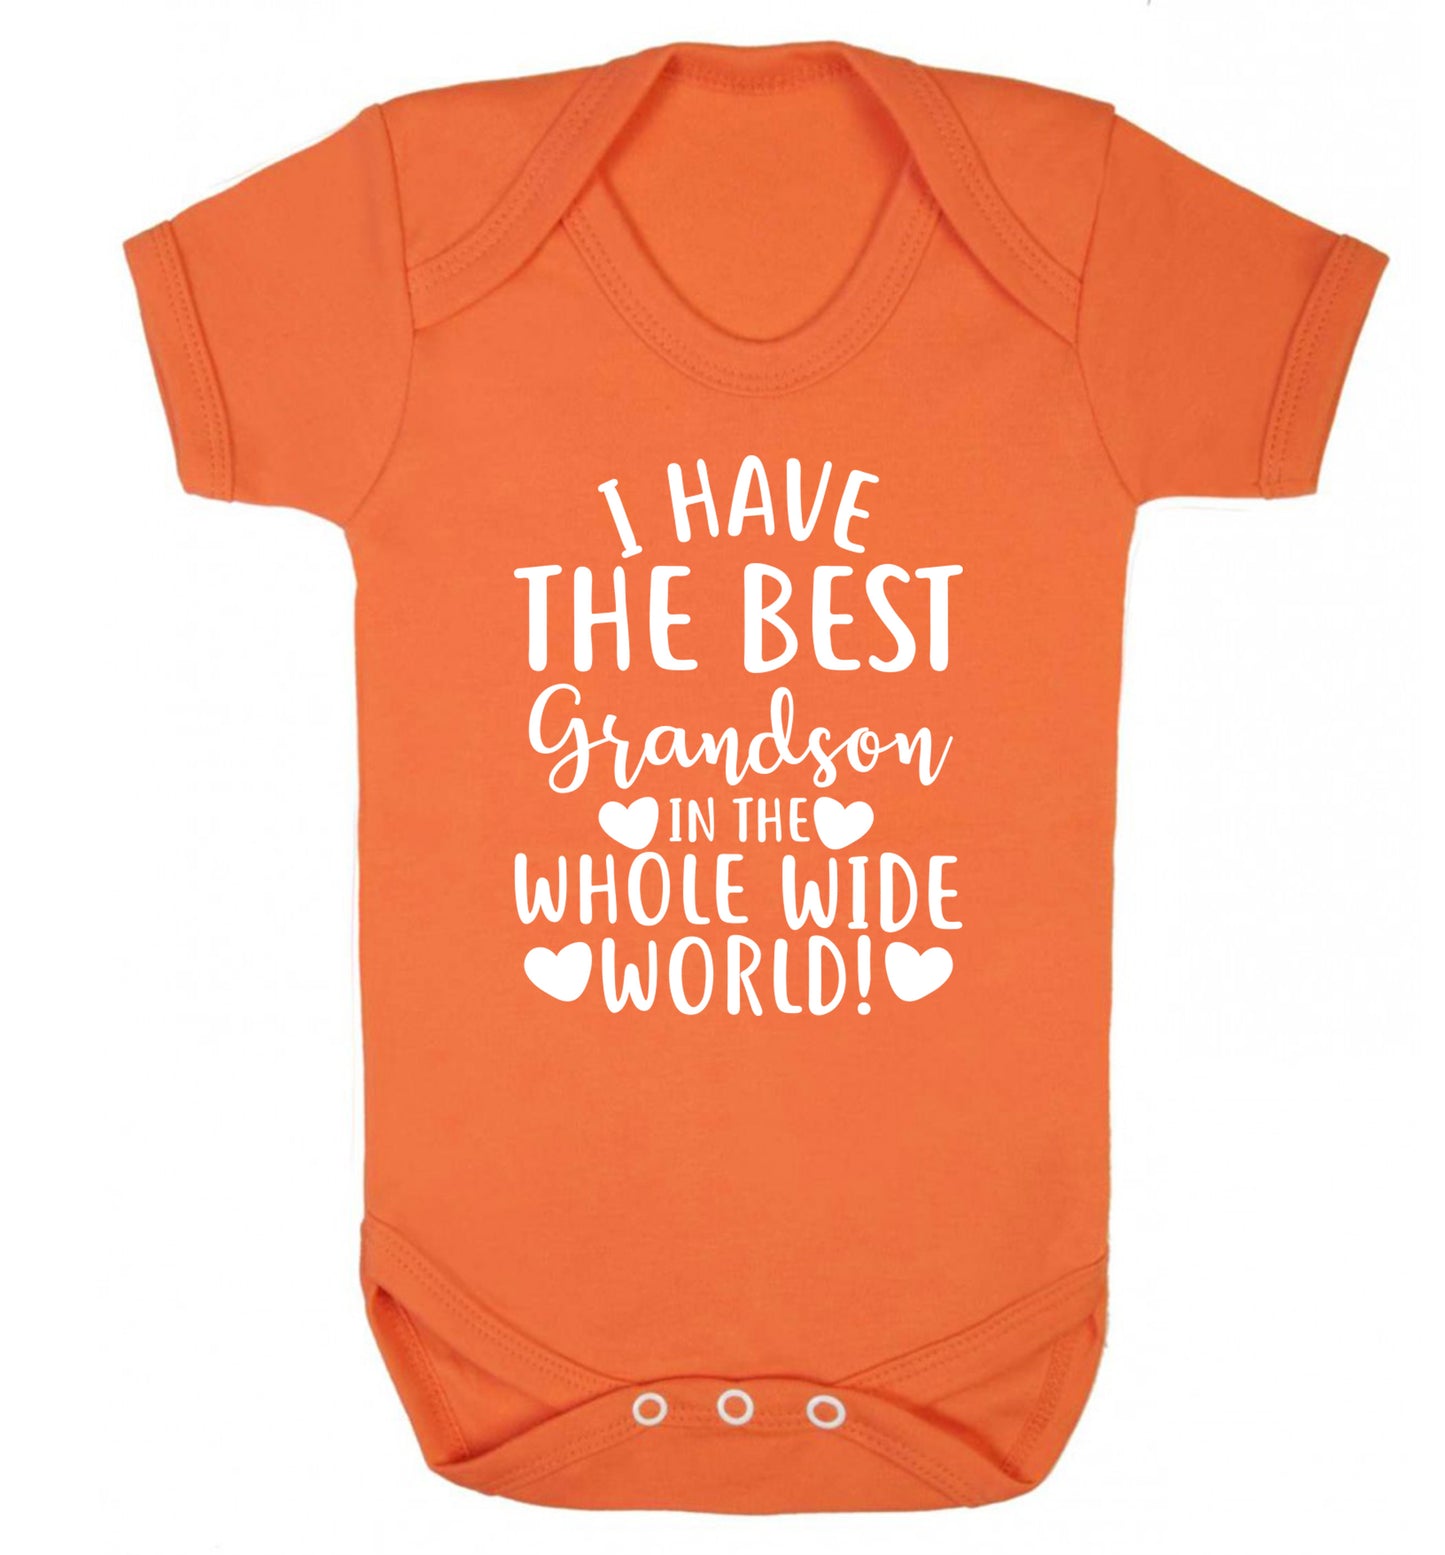 I have the best grandson in the whole wide world! Baby Vest orange 18-24 months